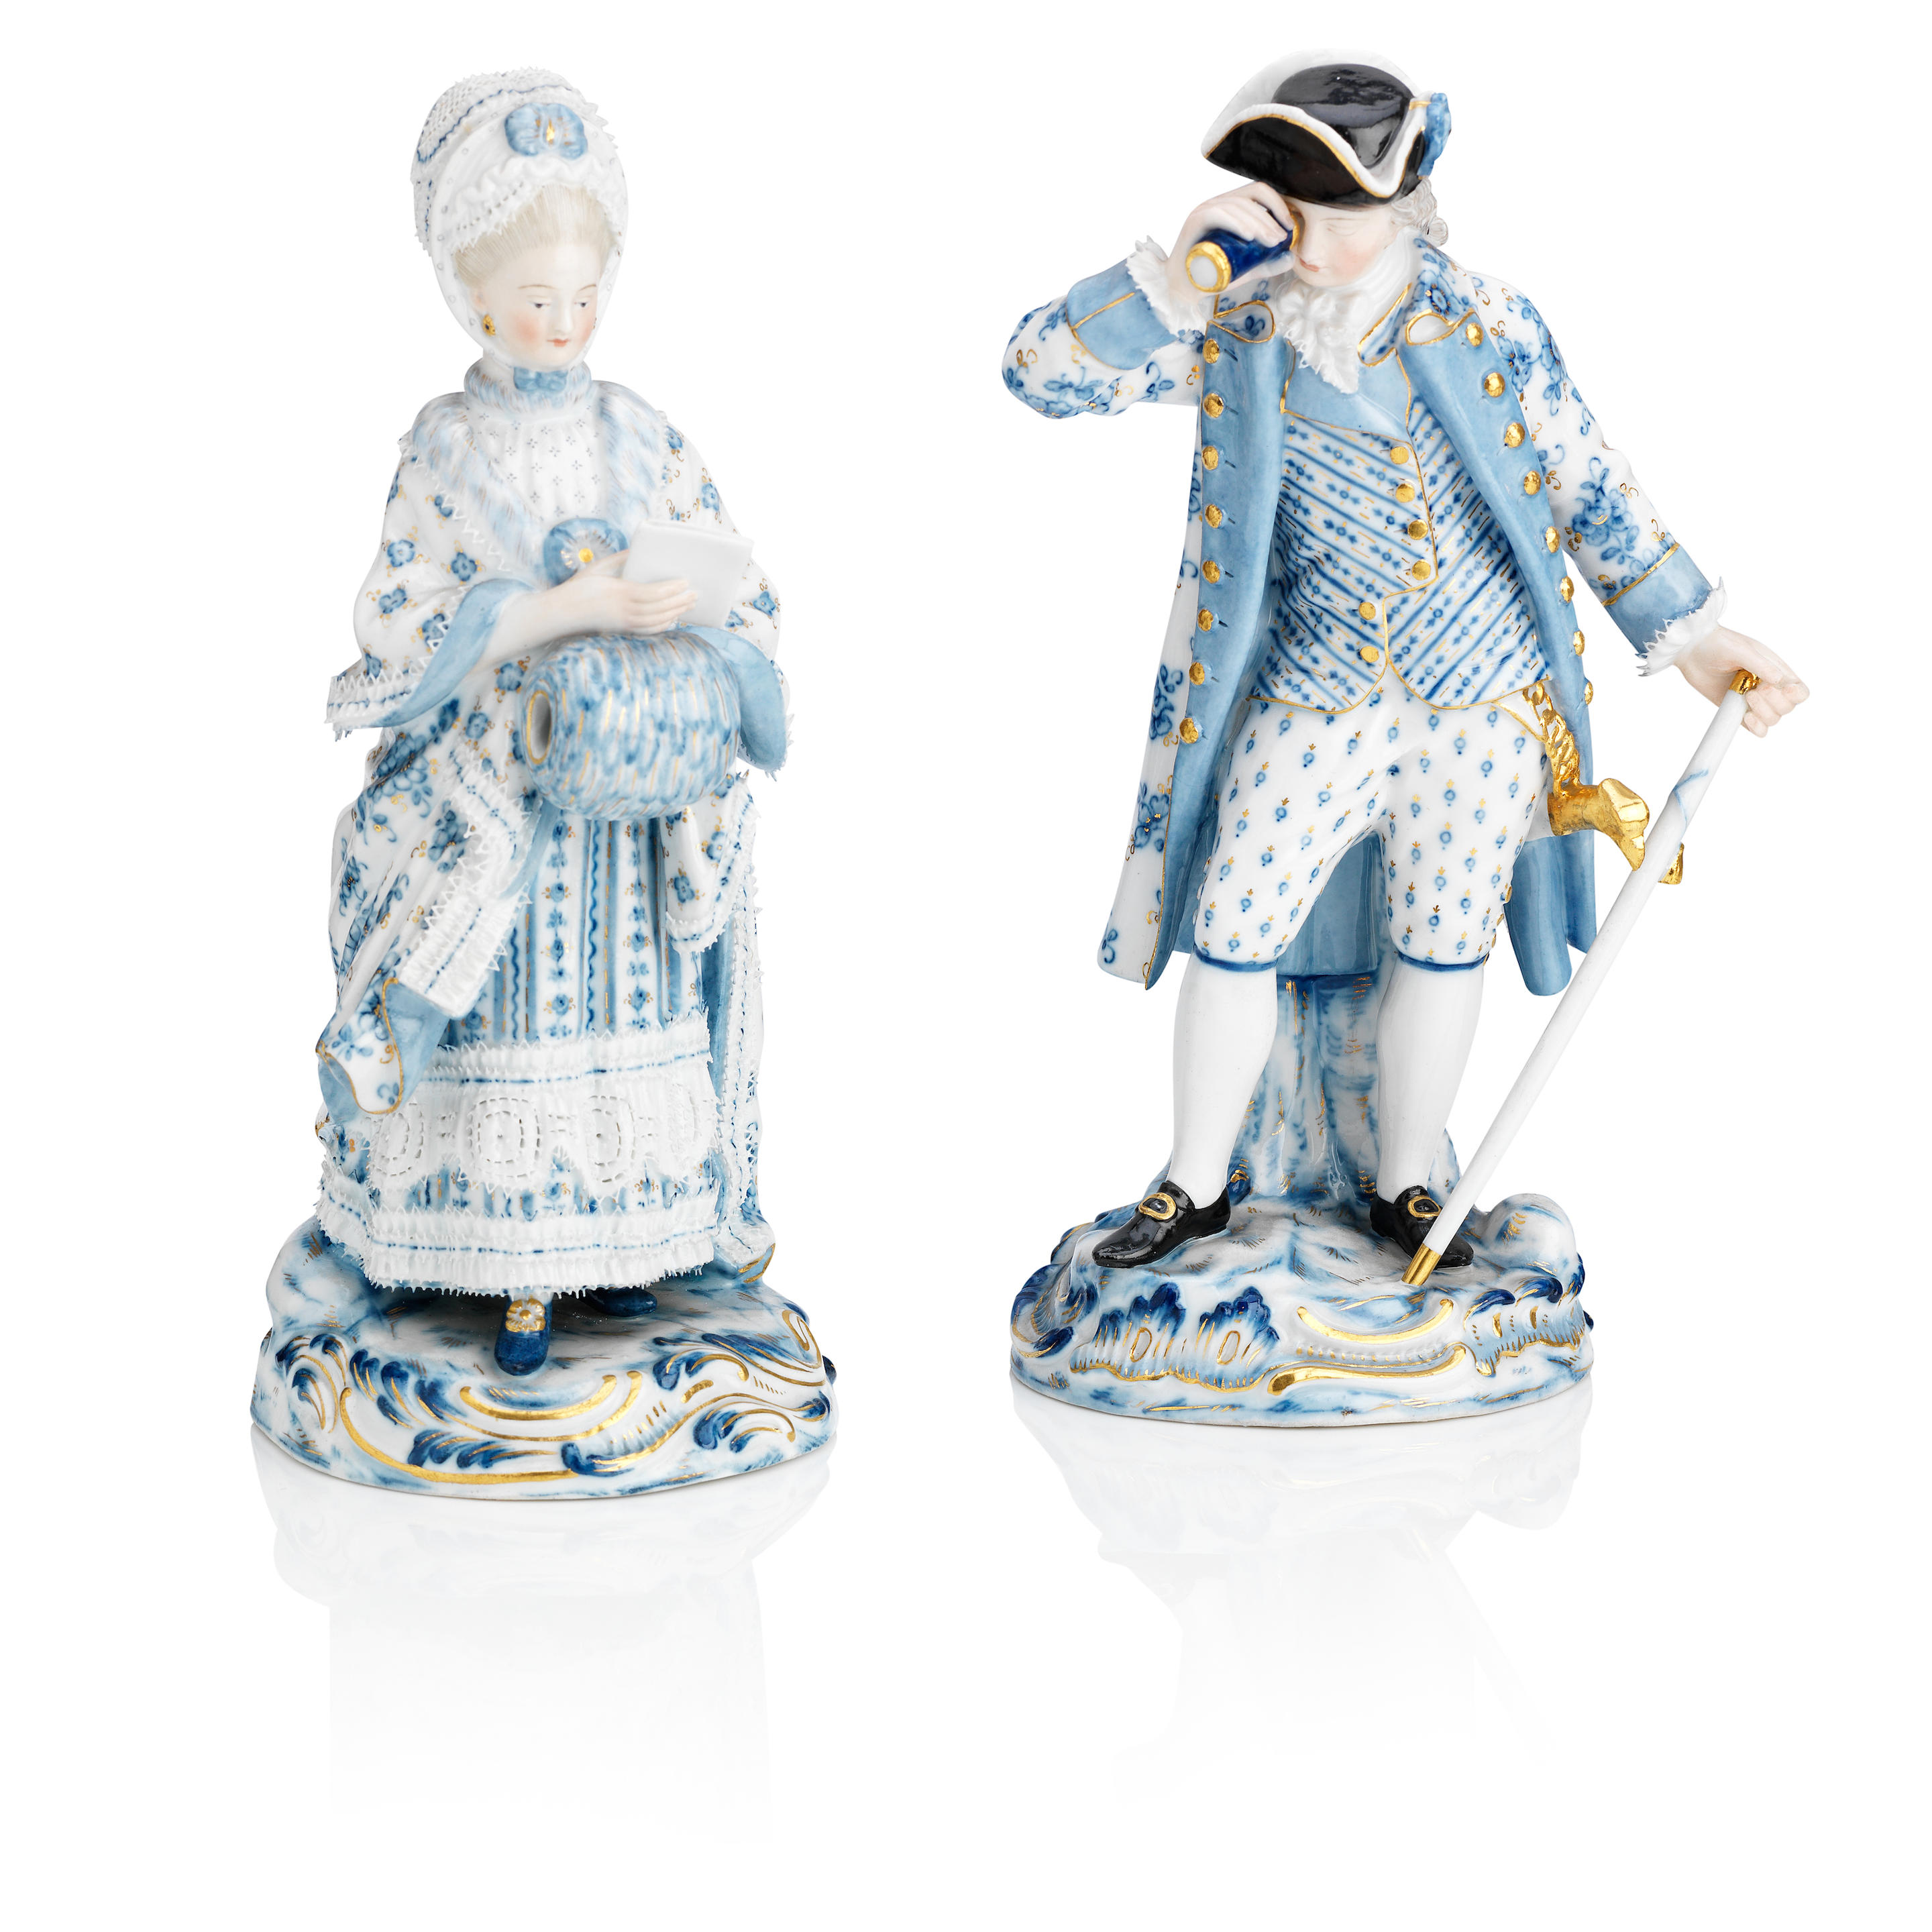 A pair of Meissen figures of a gallant and companion